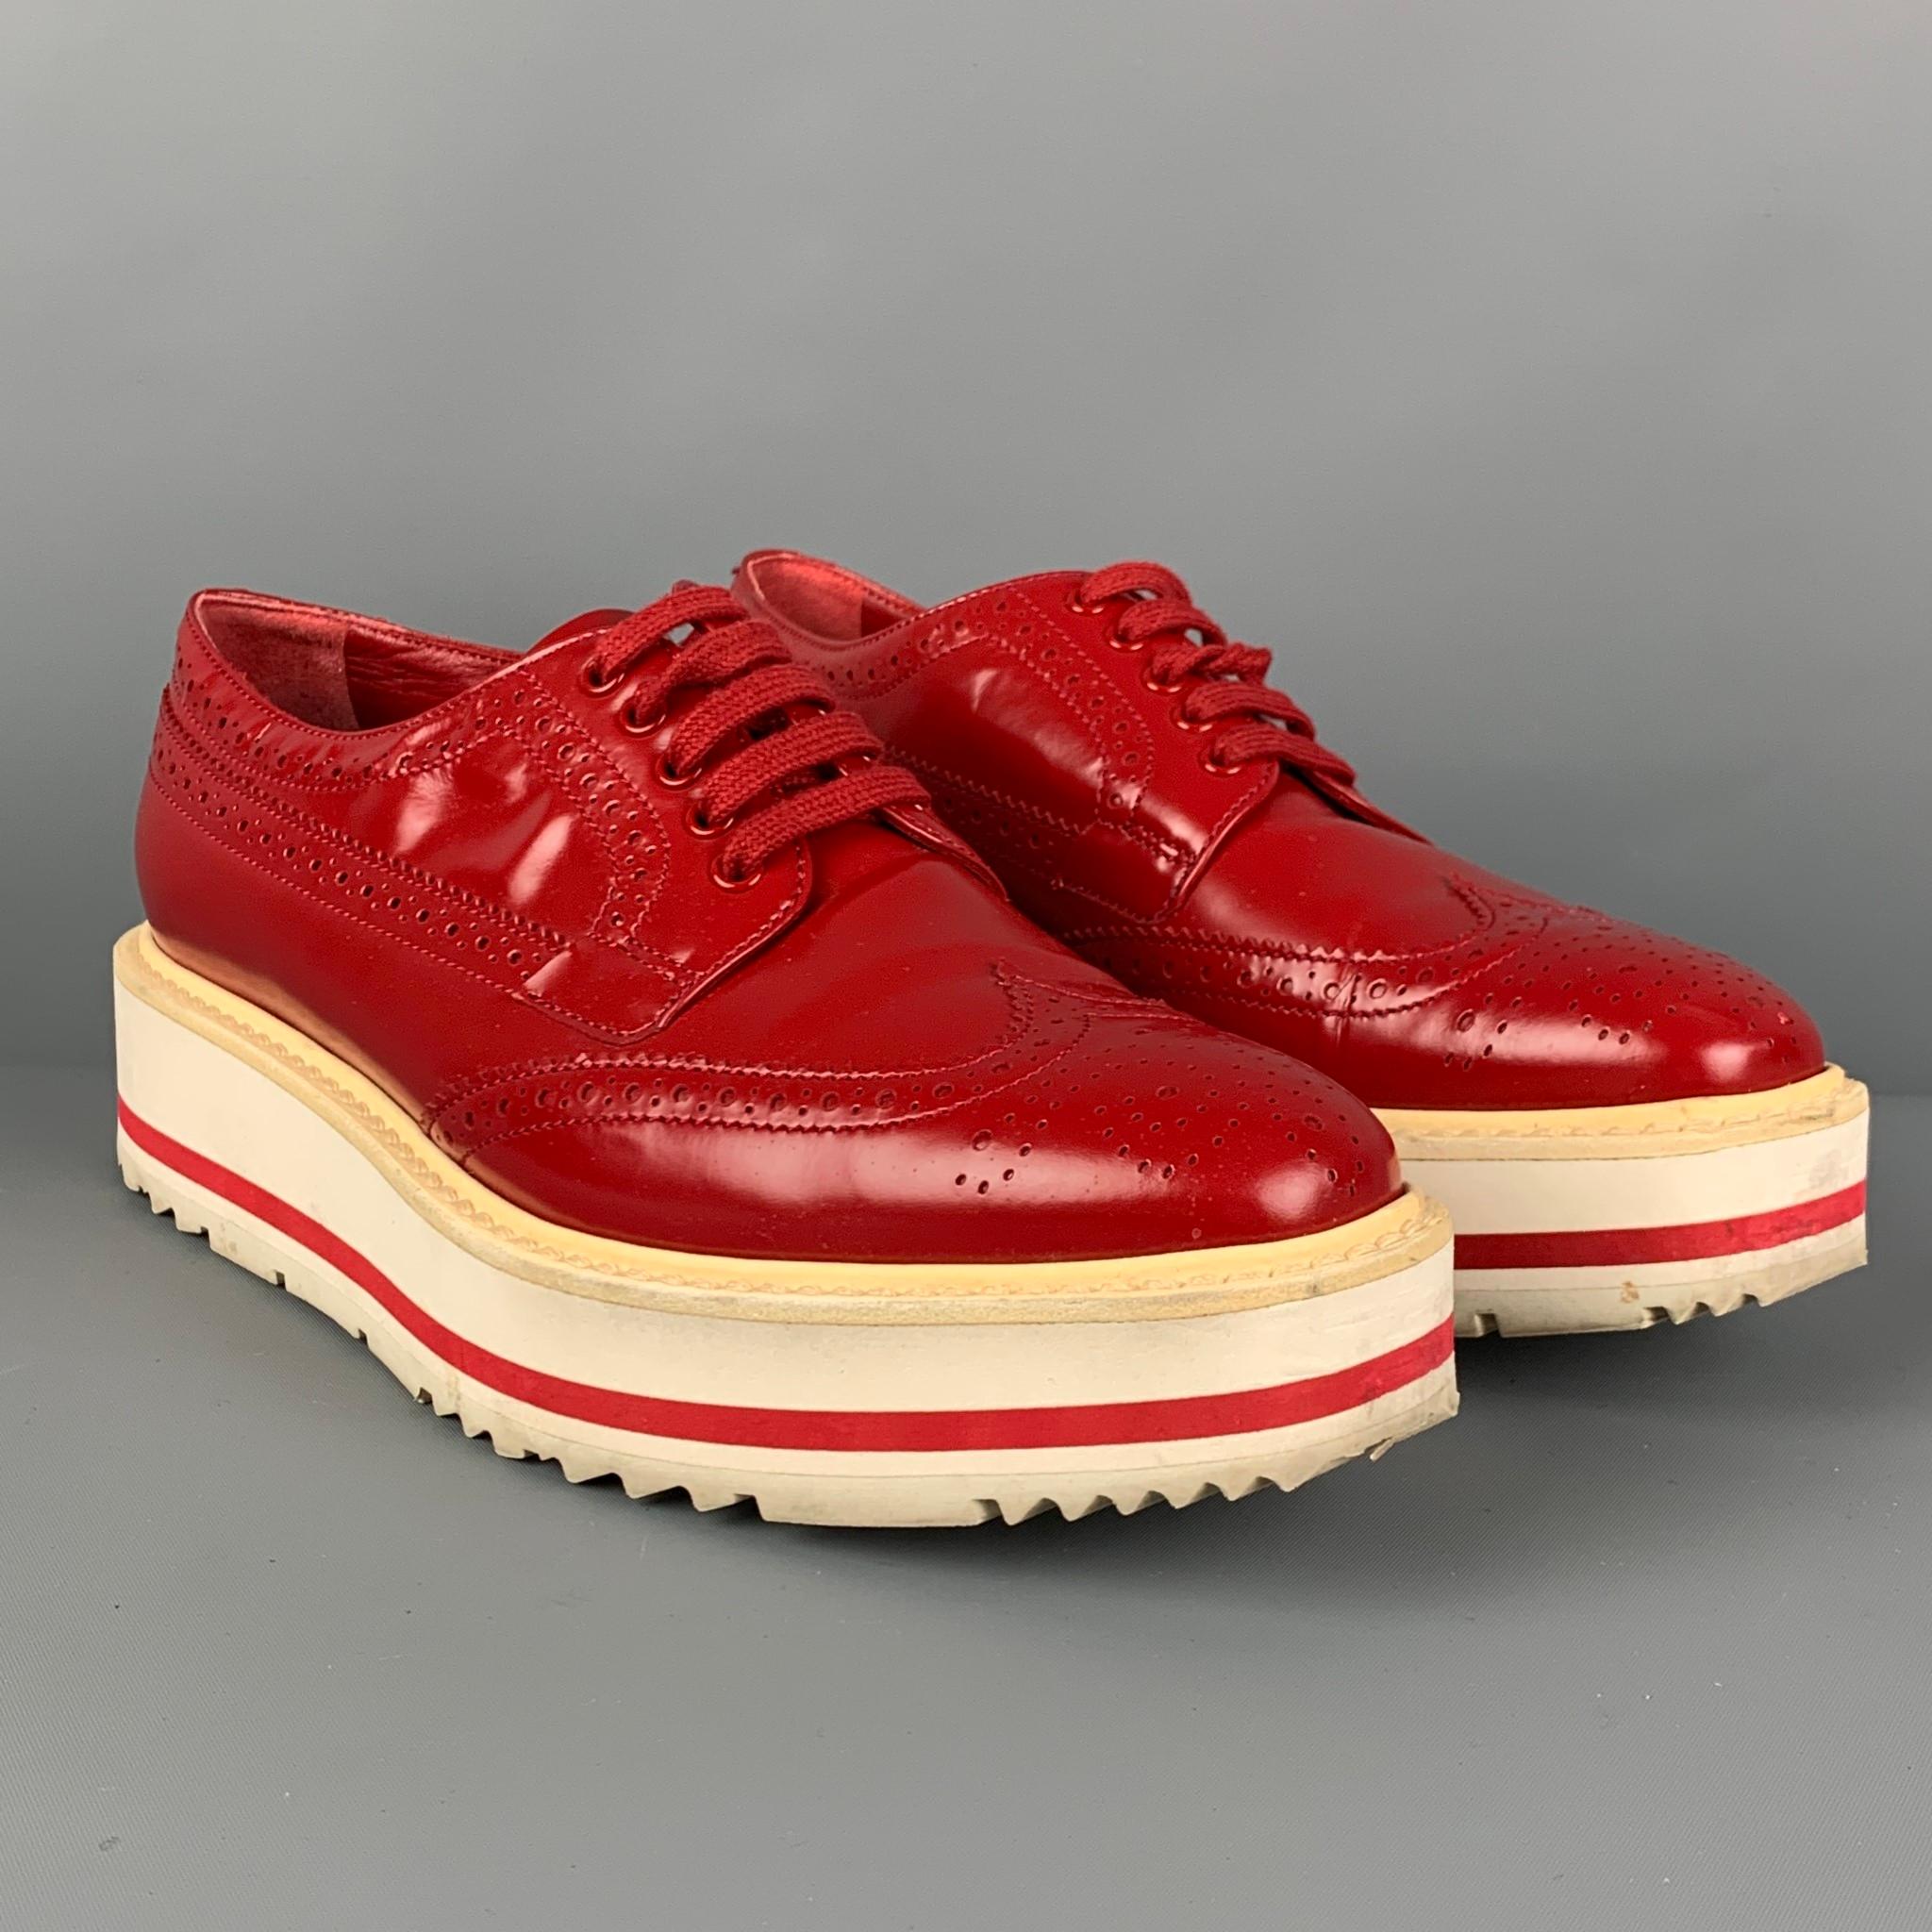 PRADA shoes comes in a red & white perforated leather featuring a wingtip style, rubber platform sole, and a lace up closure. 

Very Good Pre-Owned Condition.
Marked: 36

Outsole: 10.5 x 3.5 in. 